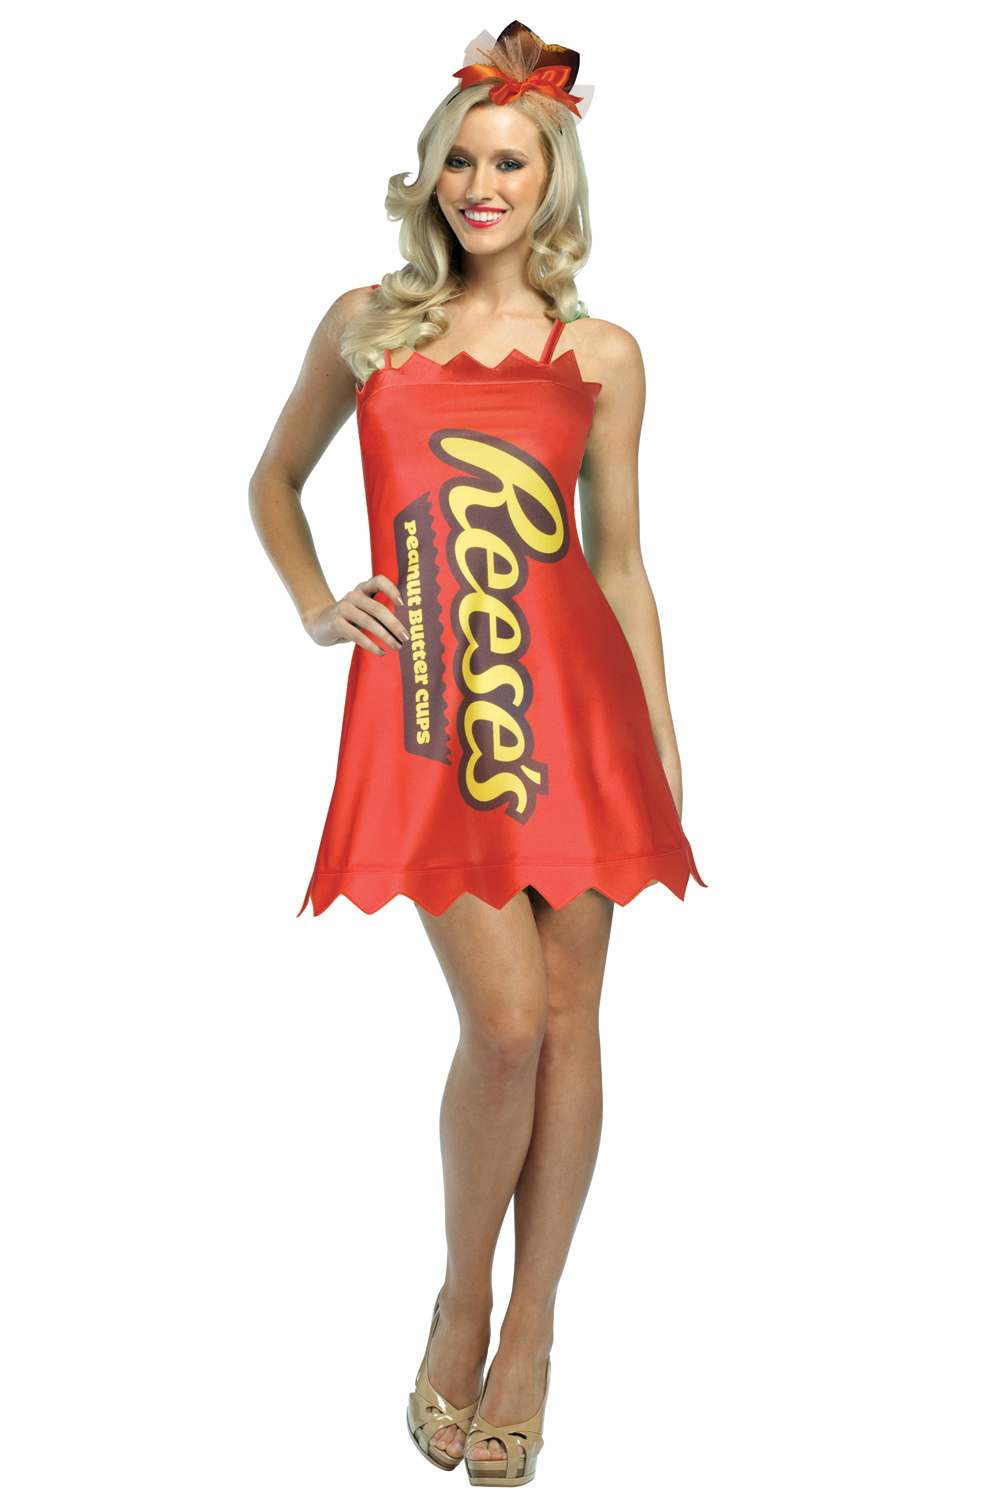 Reeses Cup Dress Adult Costume.